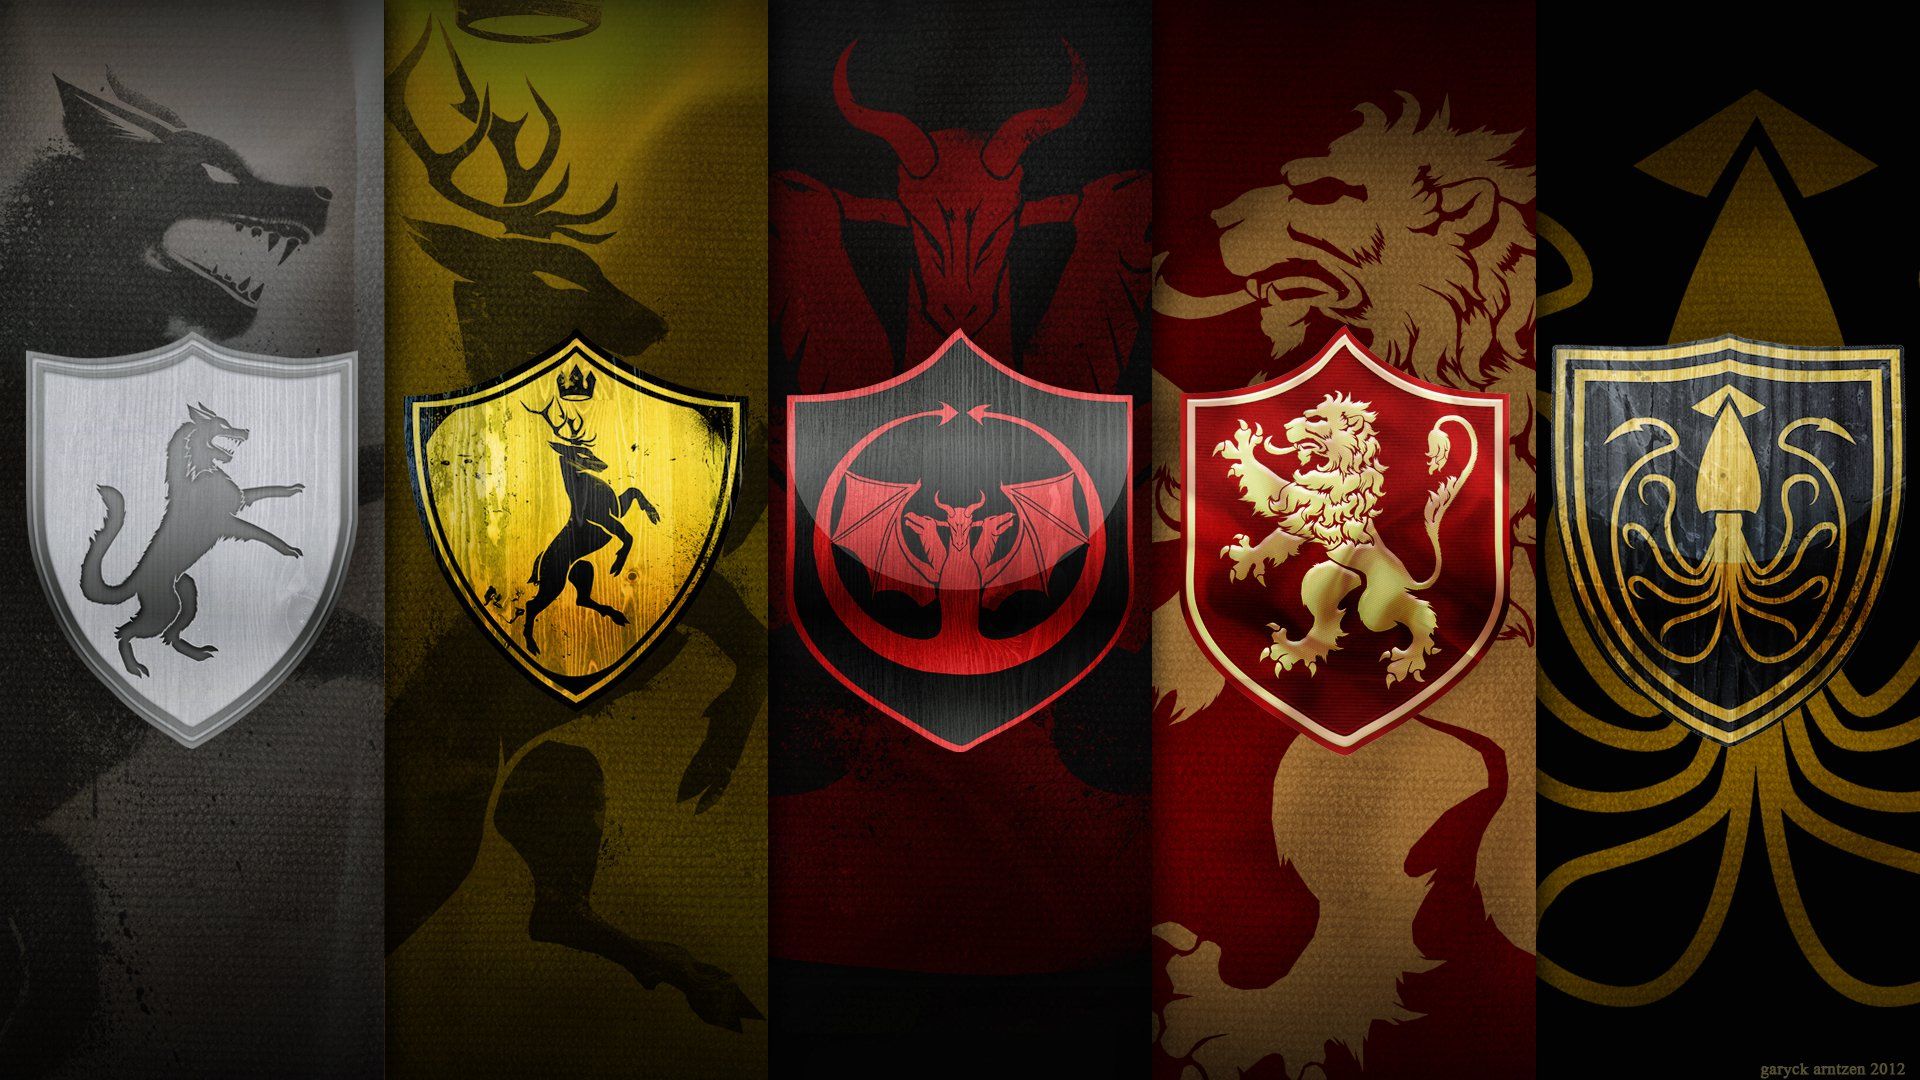 Game of Thrones Wallpaper